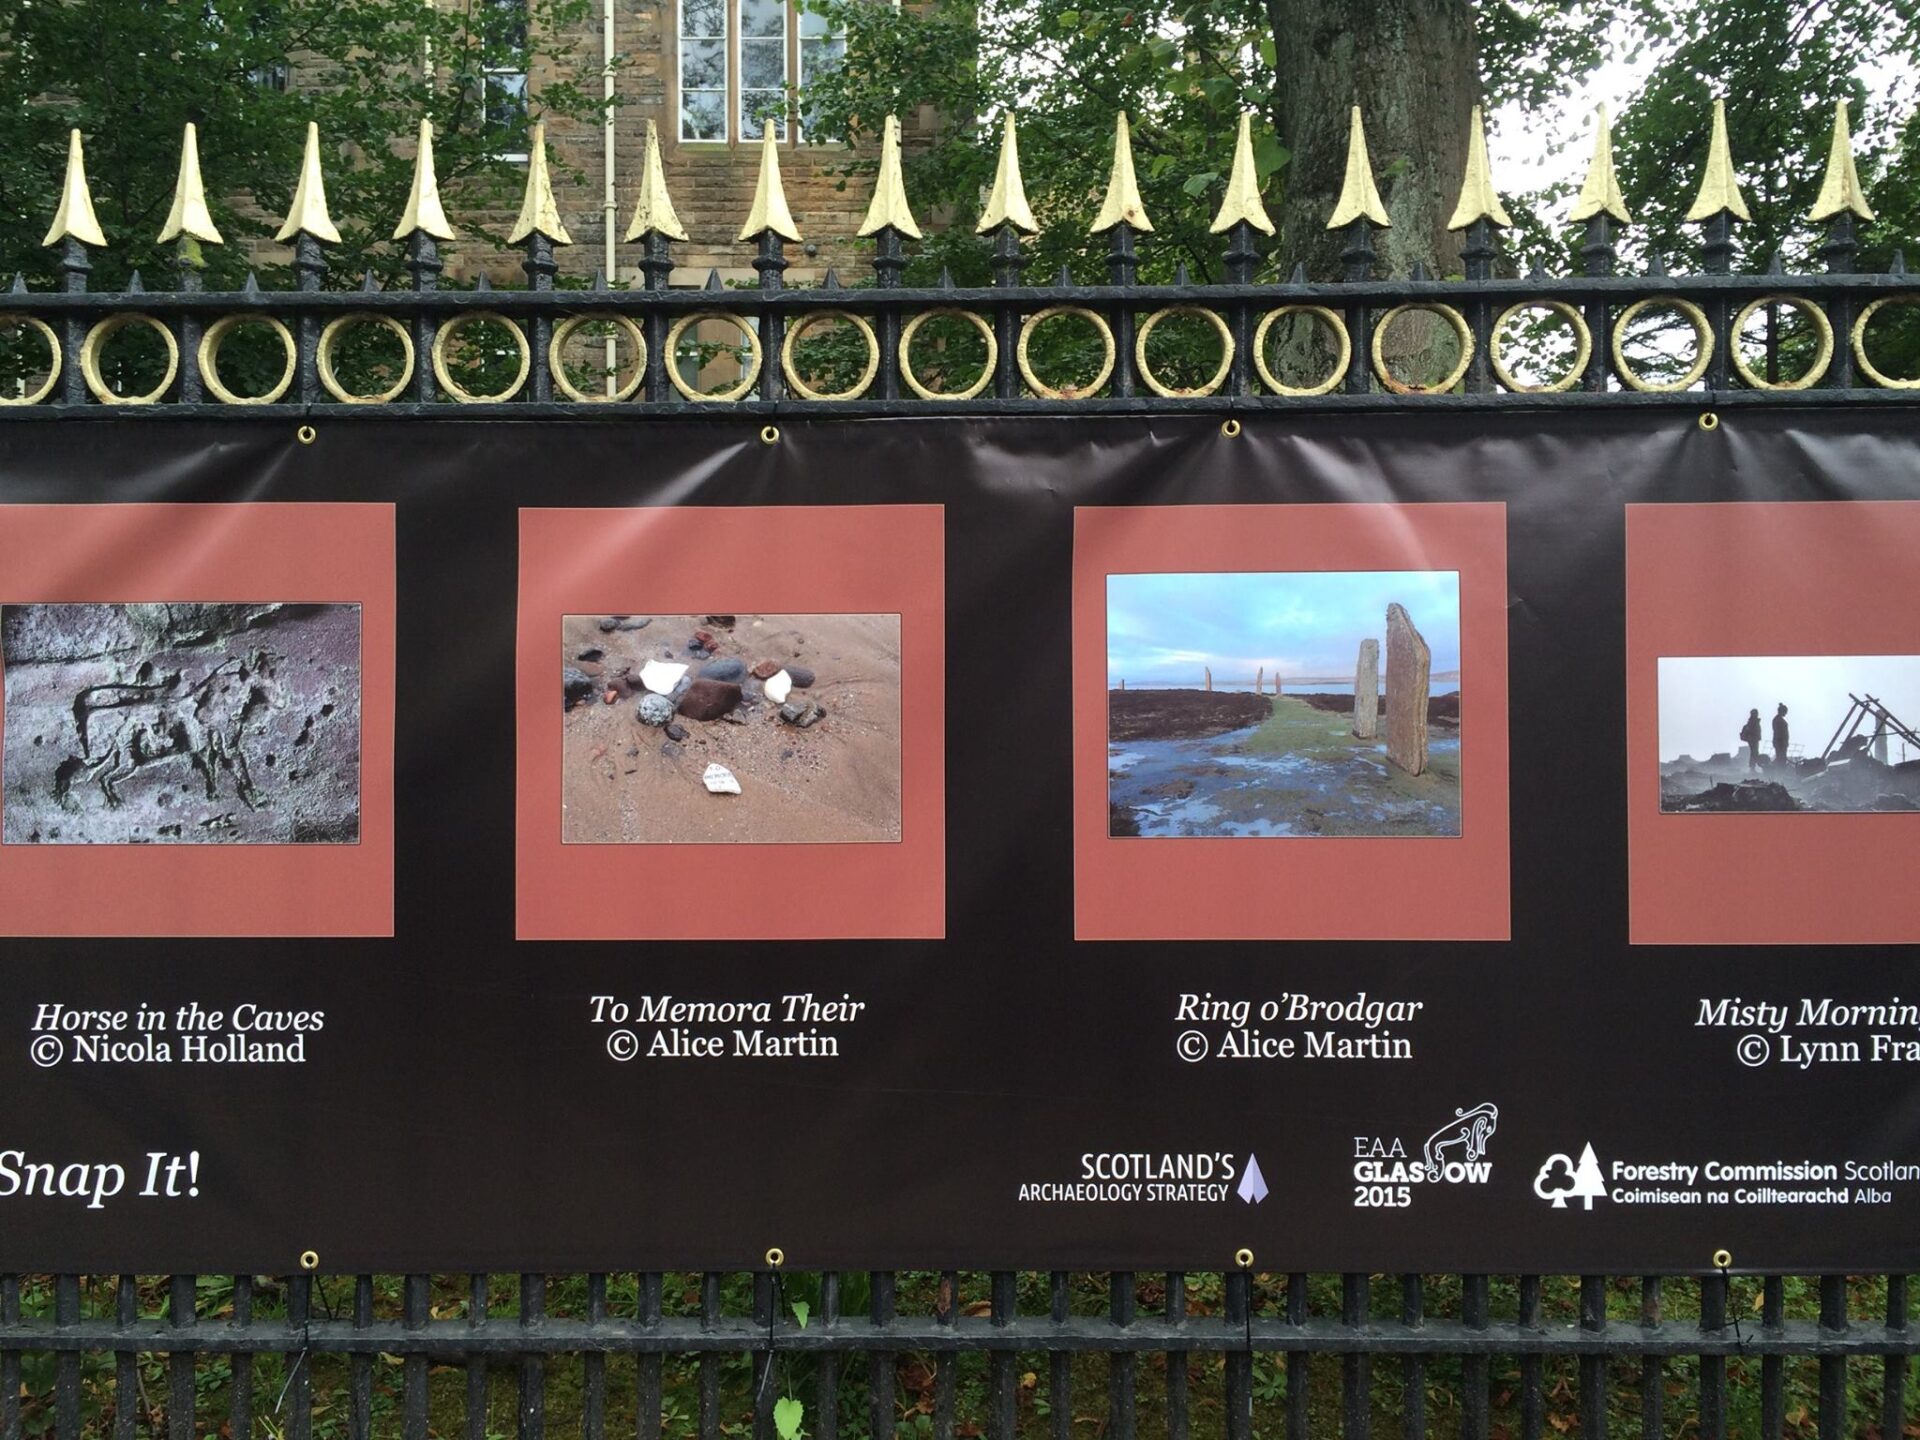 Large black banner on a black and gold iron fence with two archaeological photographs, one with fragments on a beach titled 'To Memora Their' and another of standing stones in Orkney named 'Ring o'Brodgar', both with a red border.